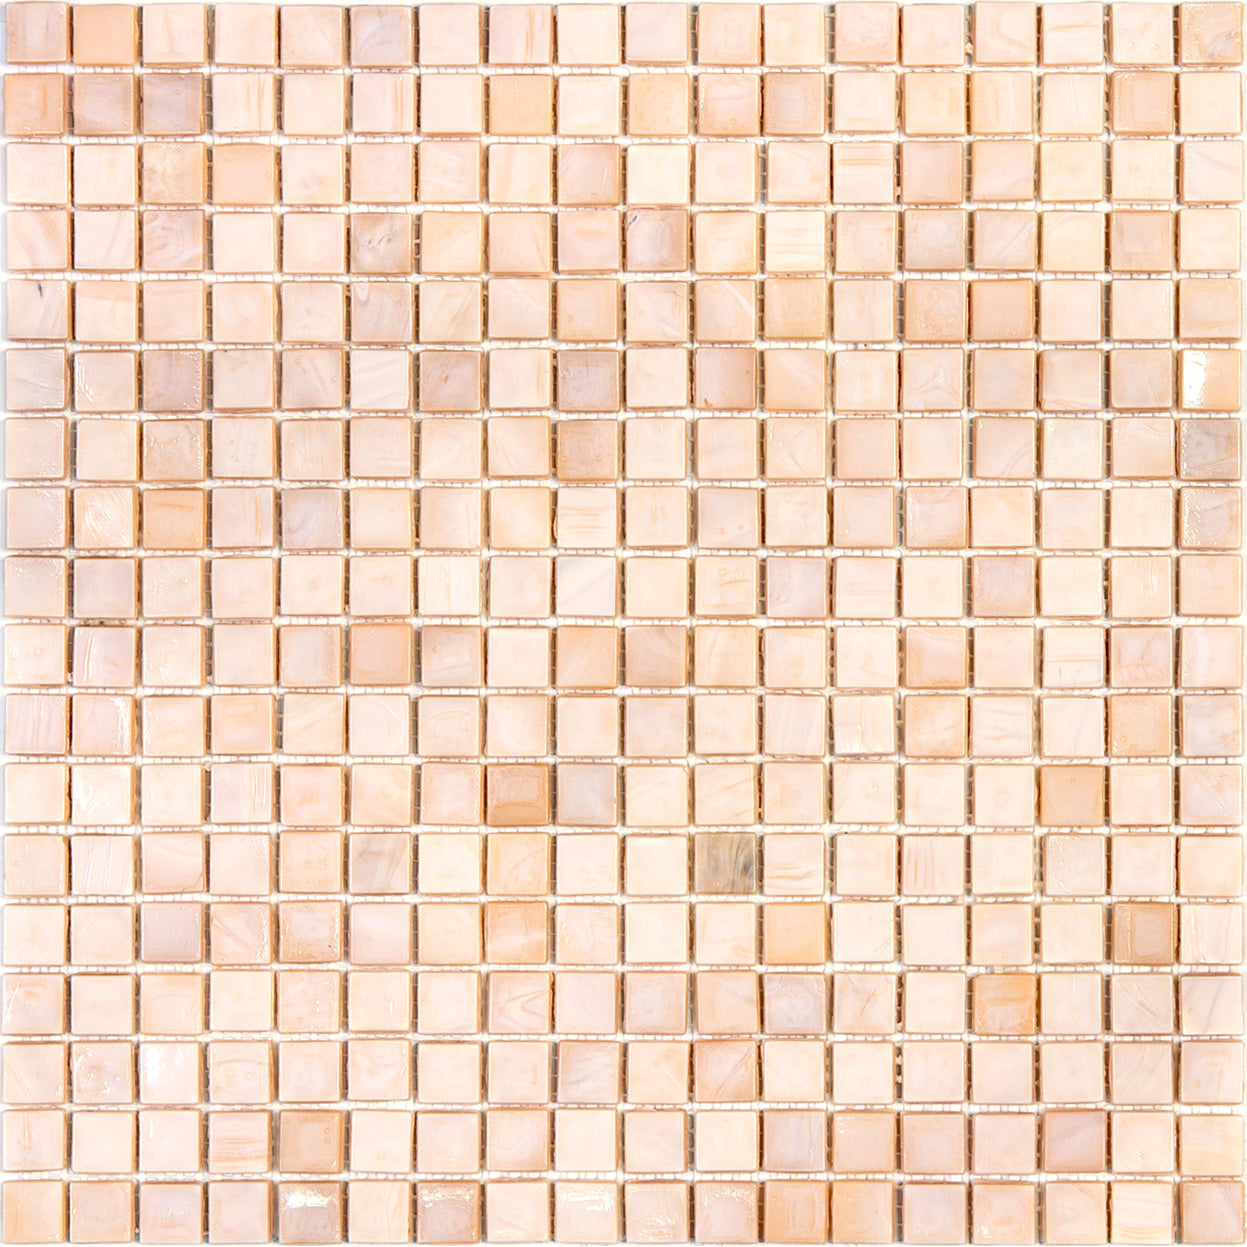 mir alma solid colors 0_6 inch nibble na90 wall and floor mosaic distributed by surface group natural materials